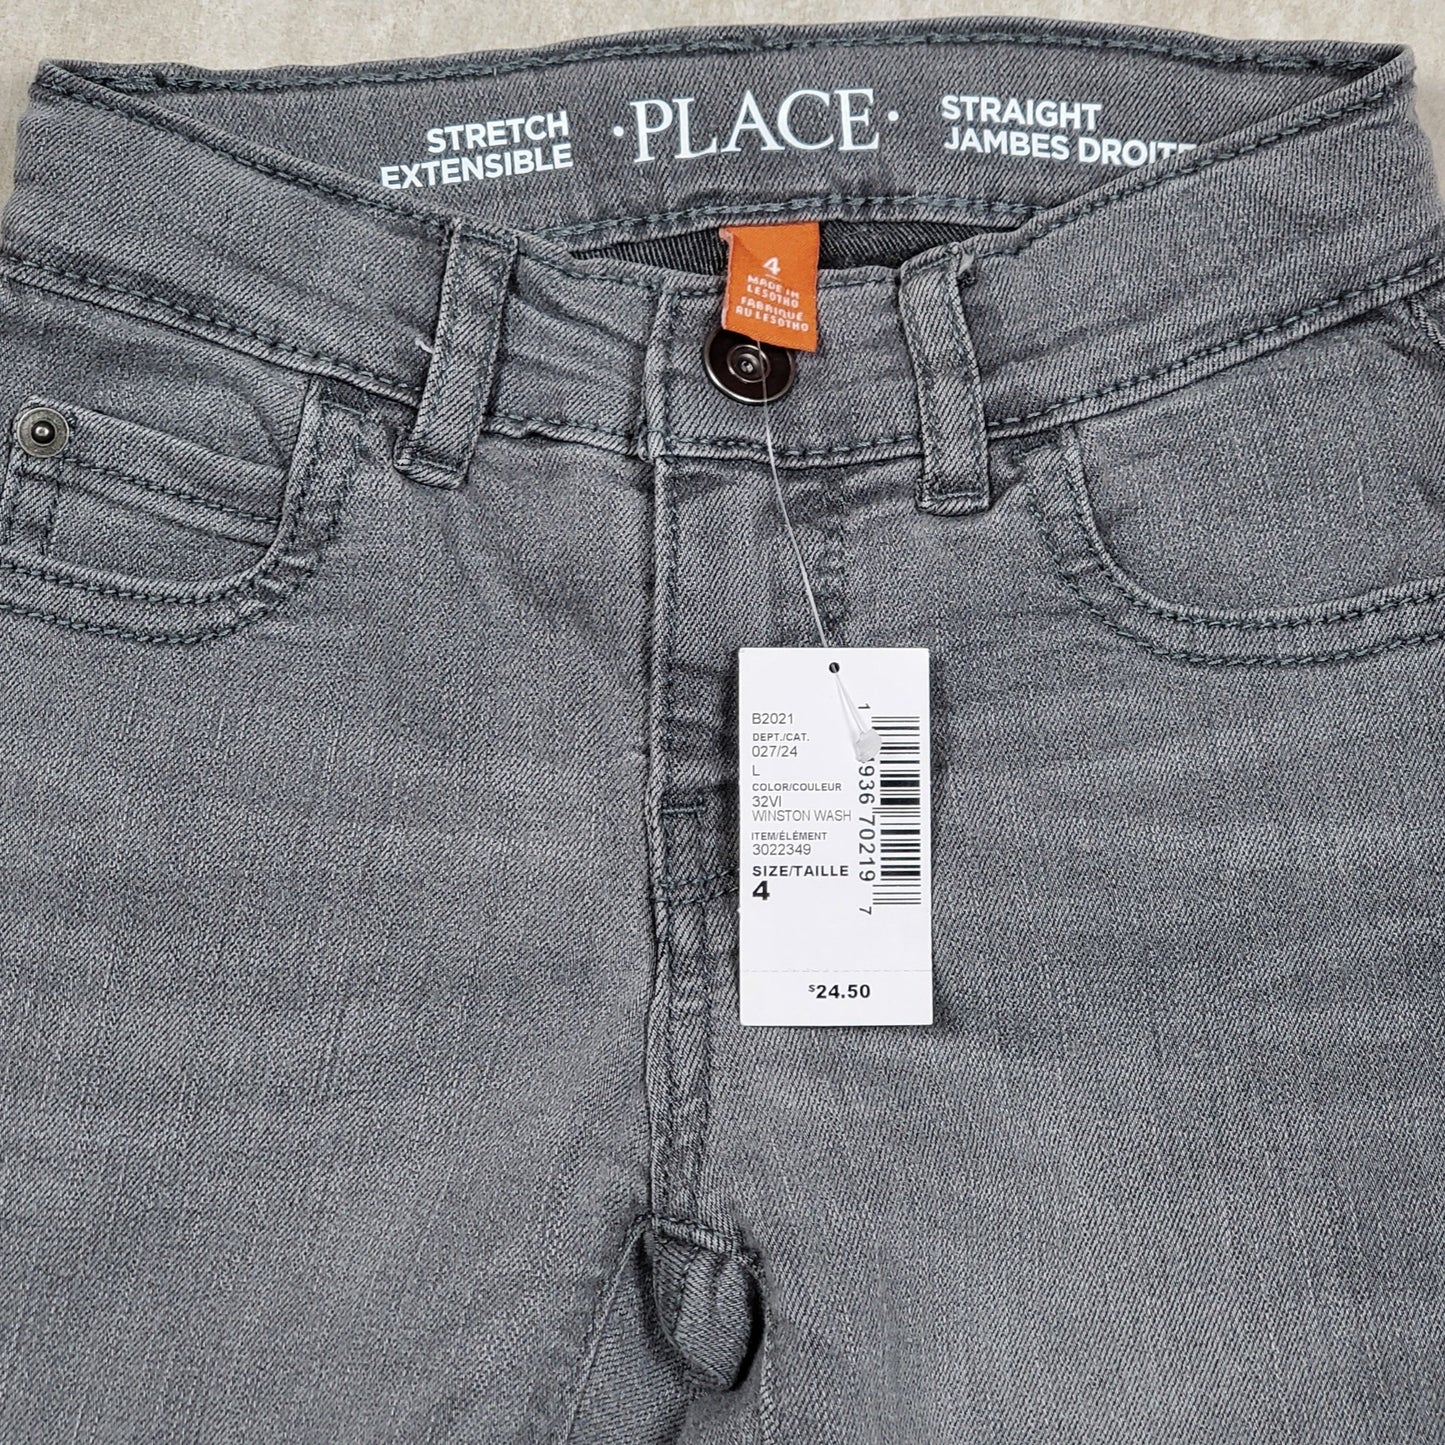 Childrens Place Boys Grey Jeans Size 4 NWT View 3